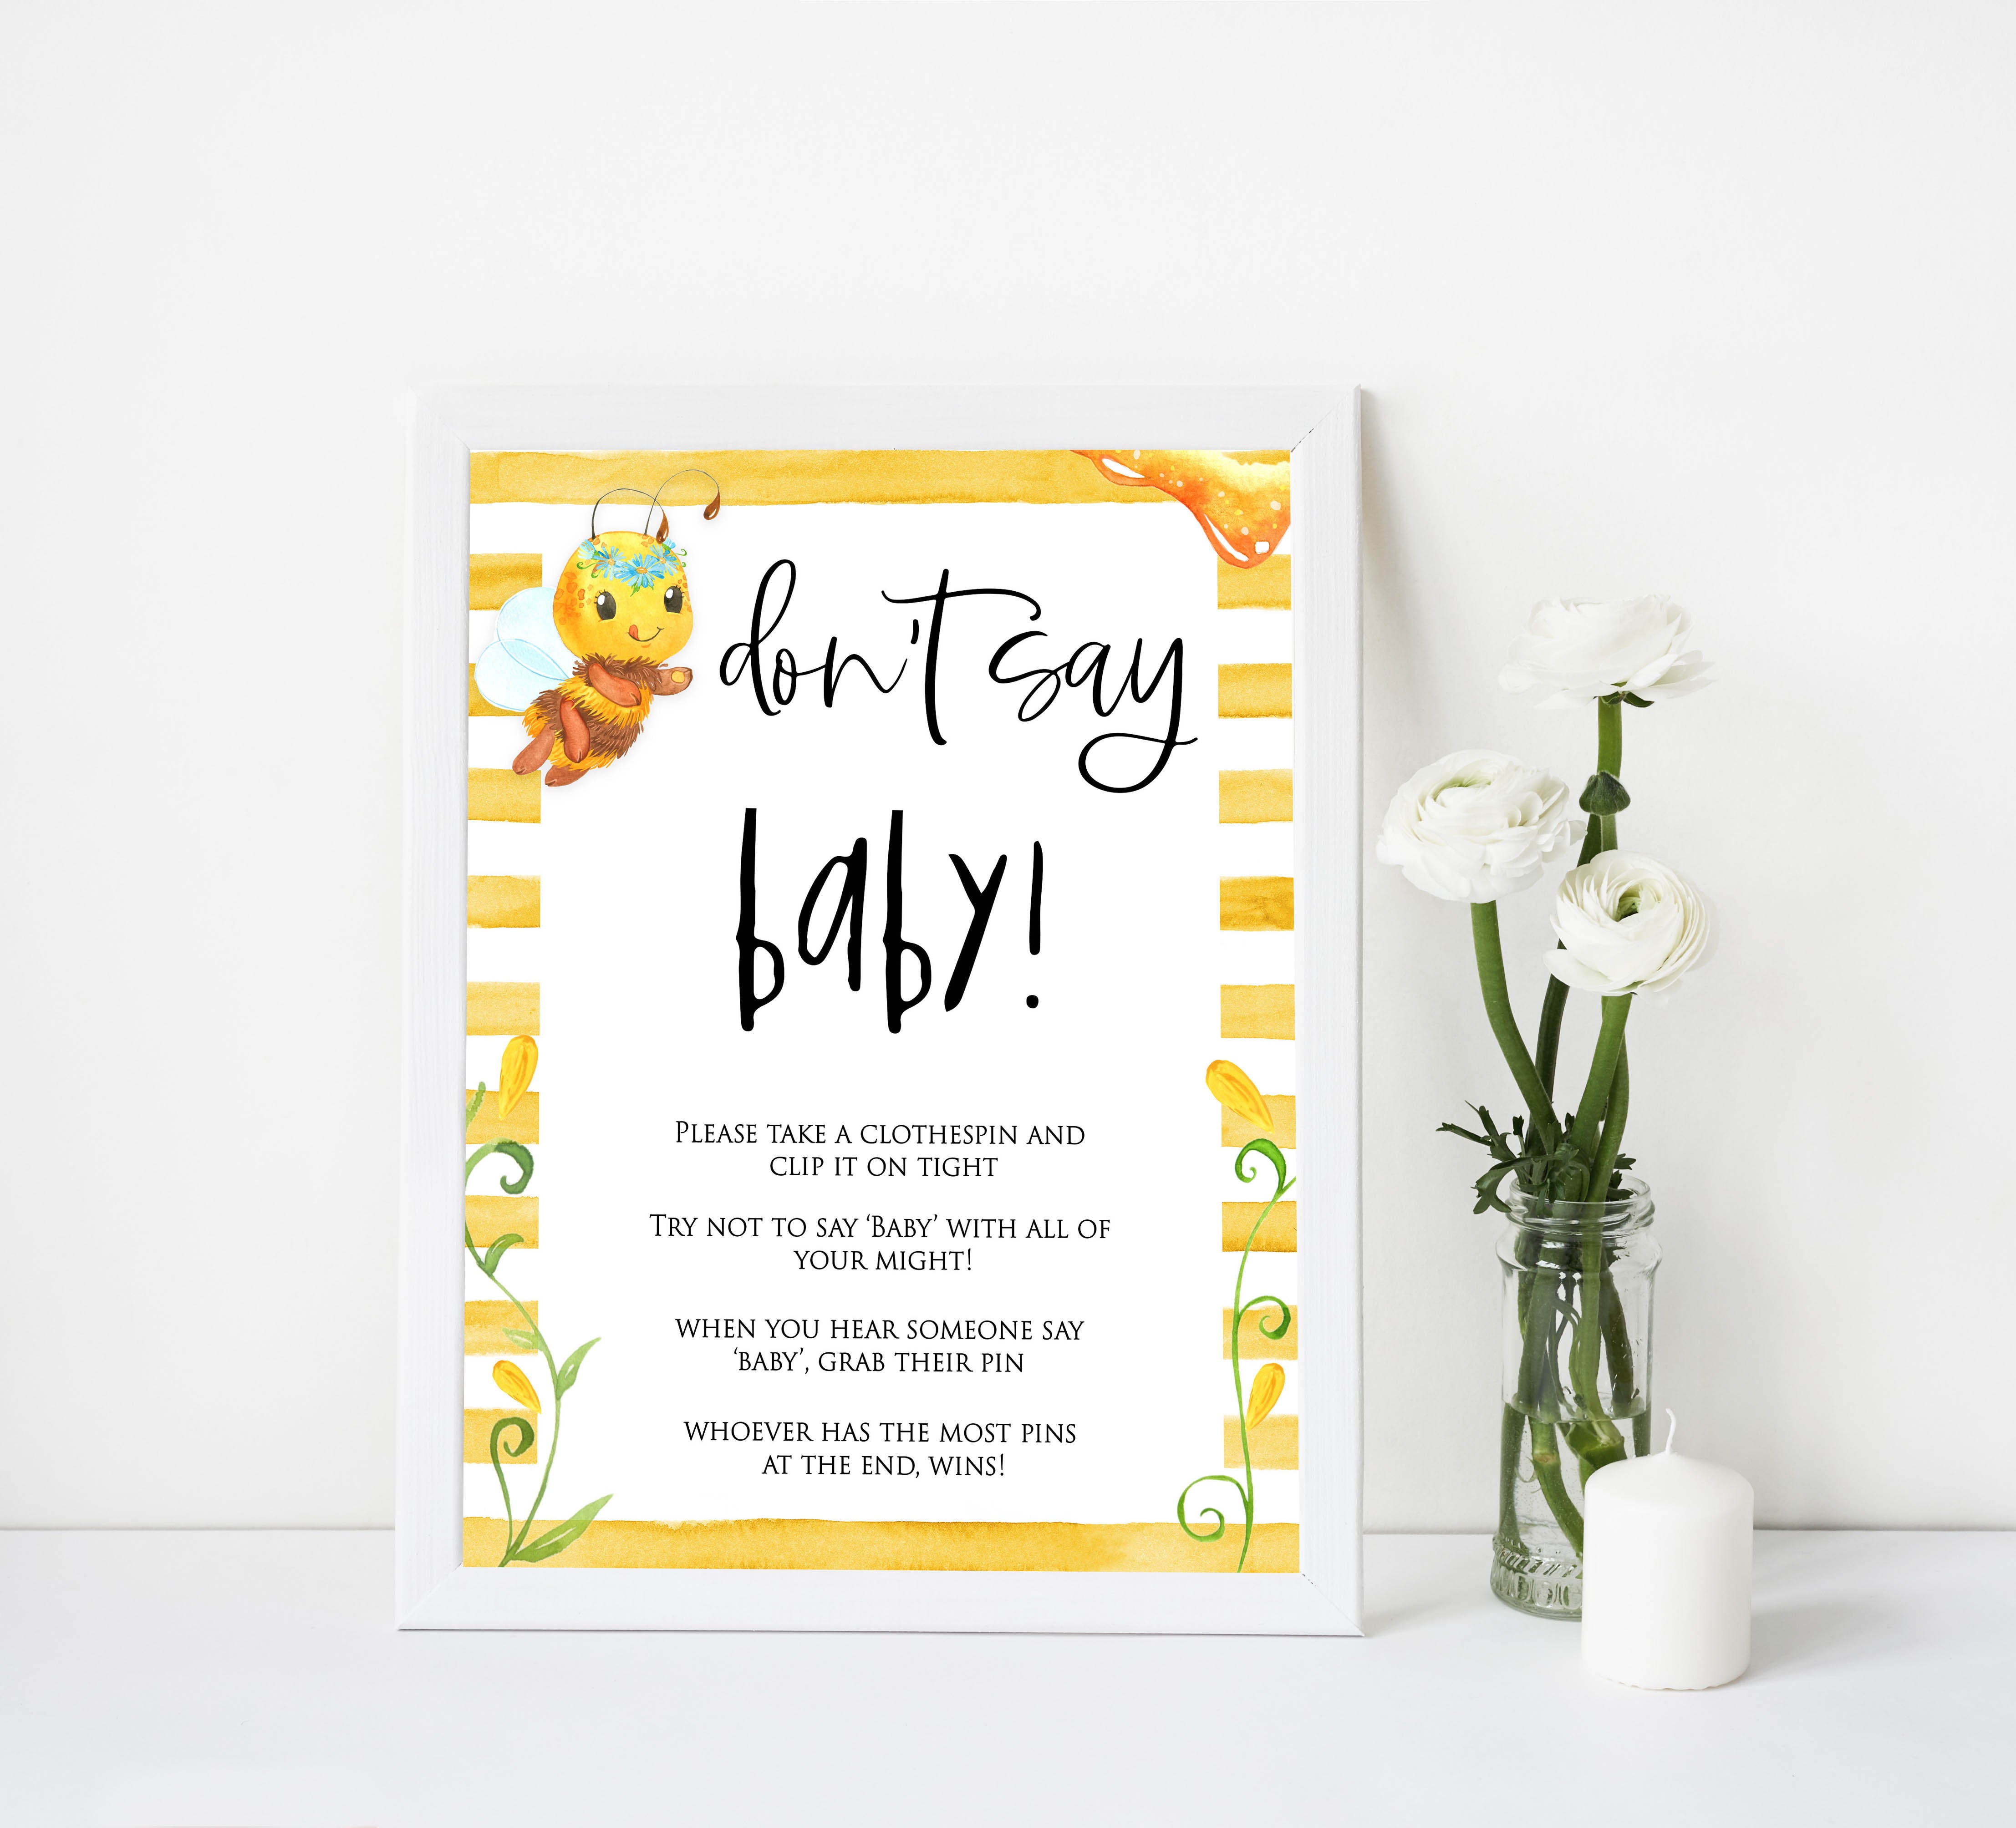 dont say baby game, dont so baby, Printable baby shower games, mommy bee fun baby games, baby shower games, fun baby shower ideas, top baby shower ideas, mommy to bee baby shower, friends baby shower ideas